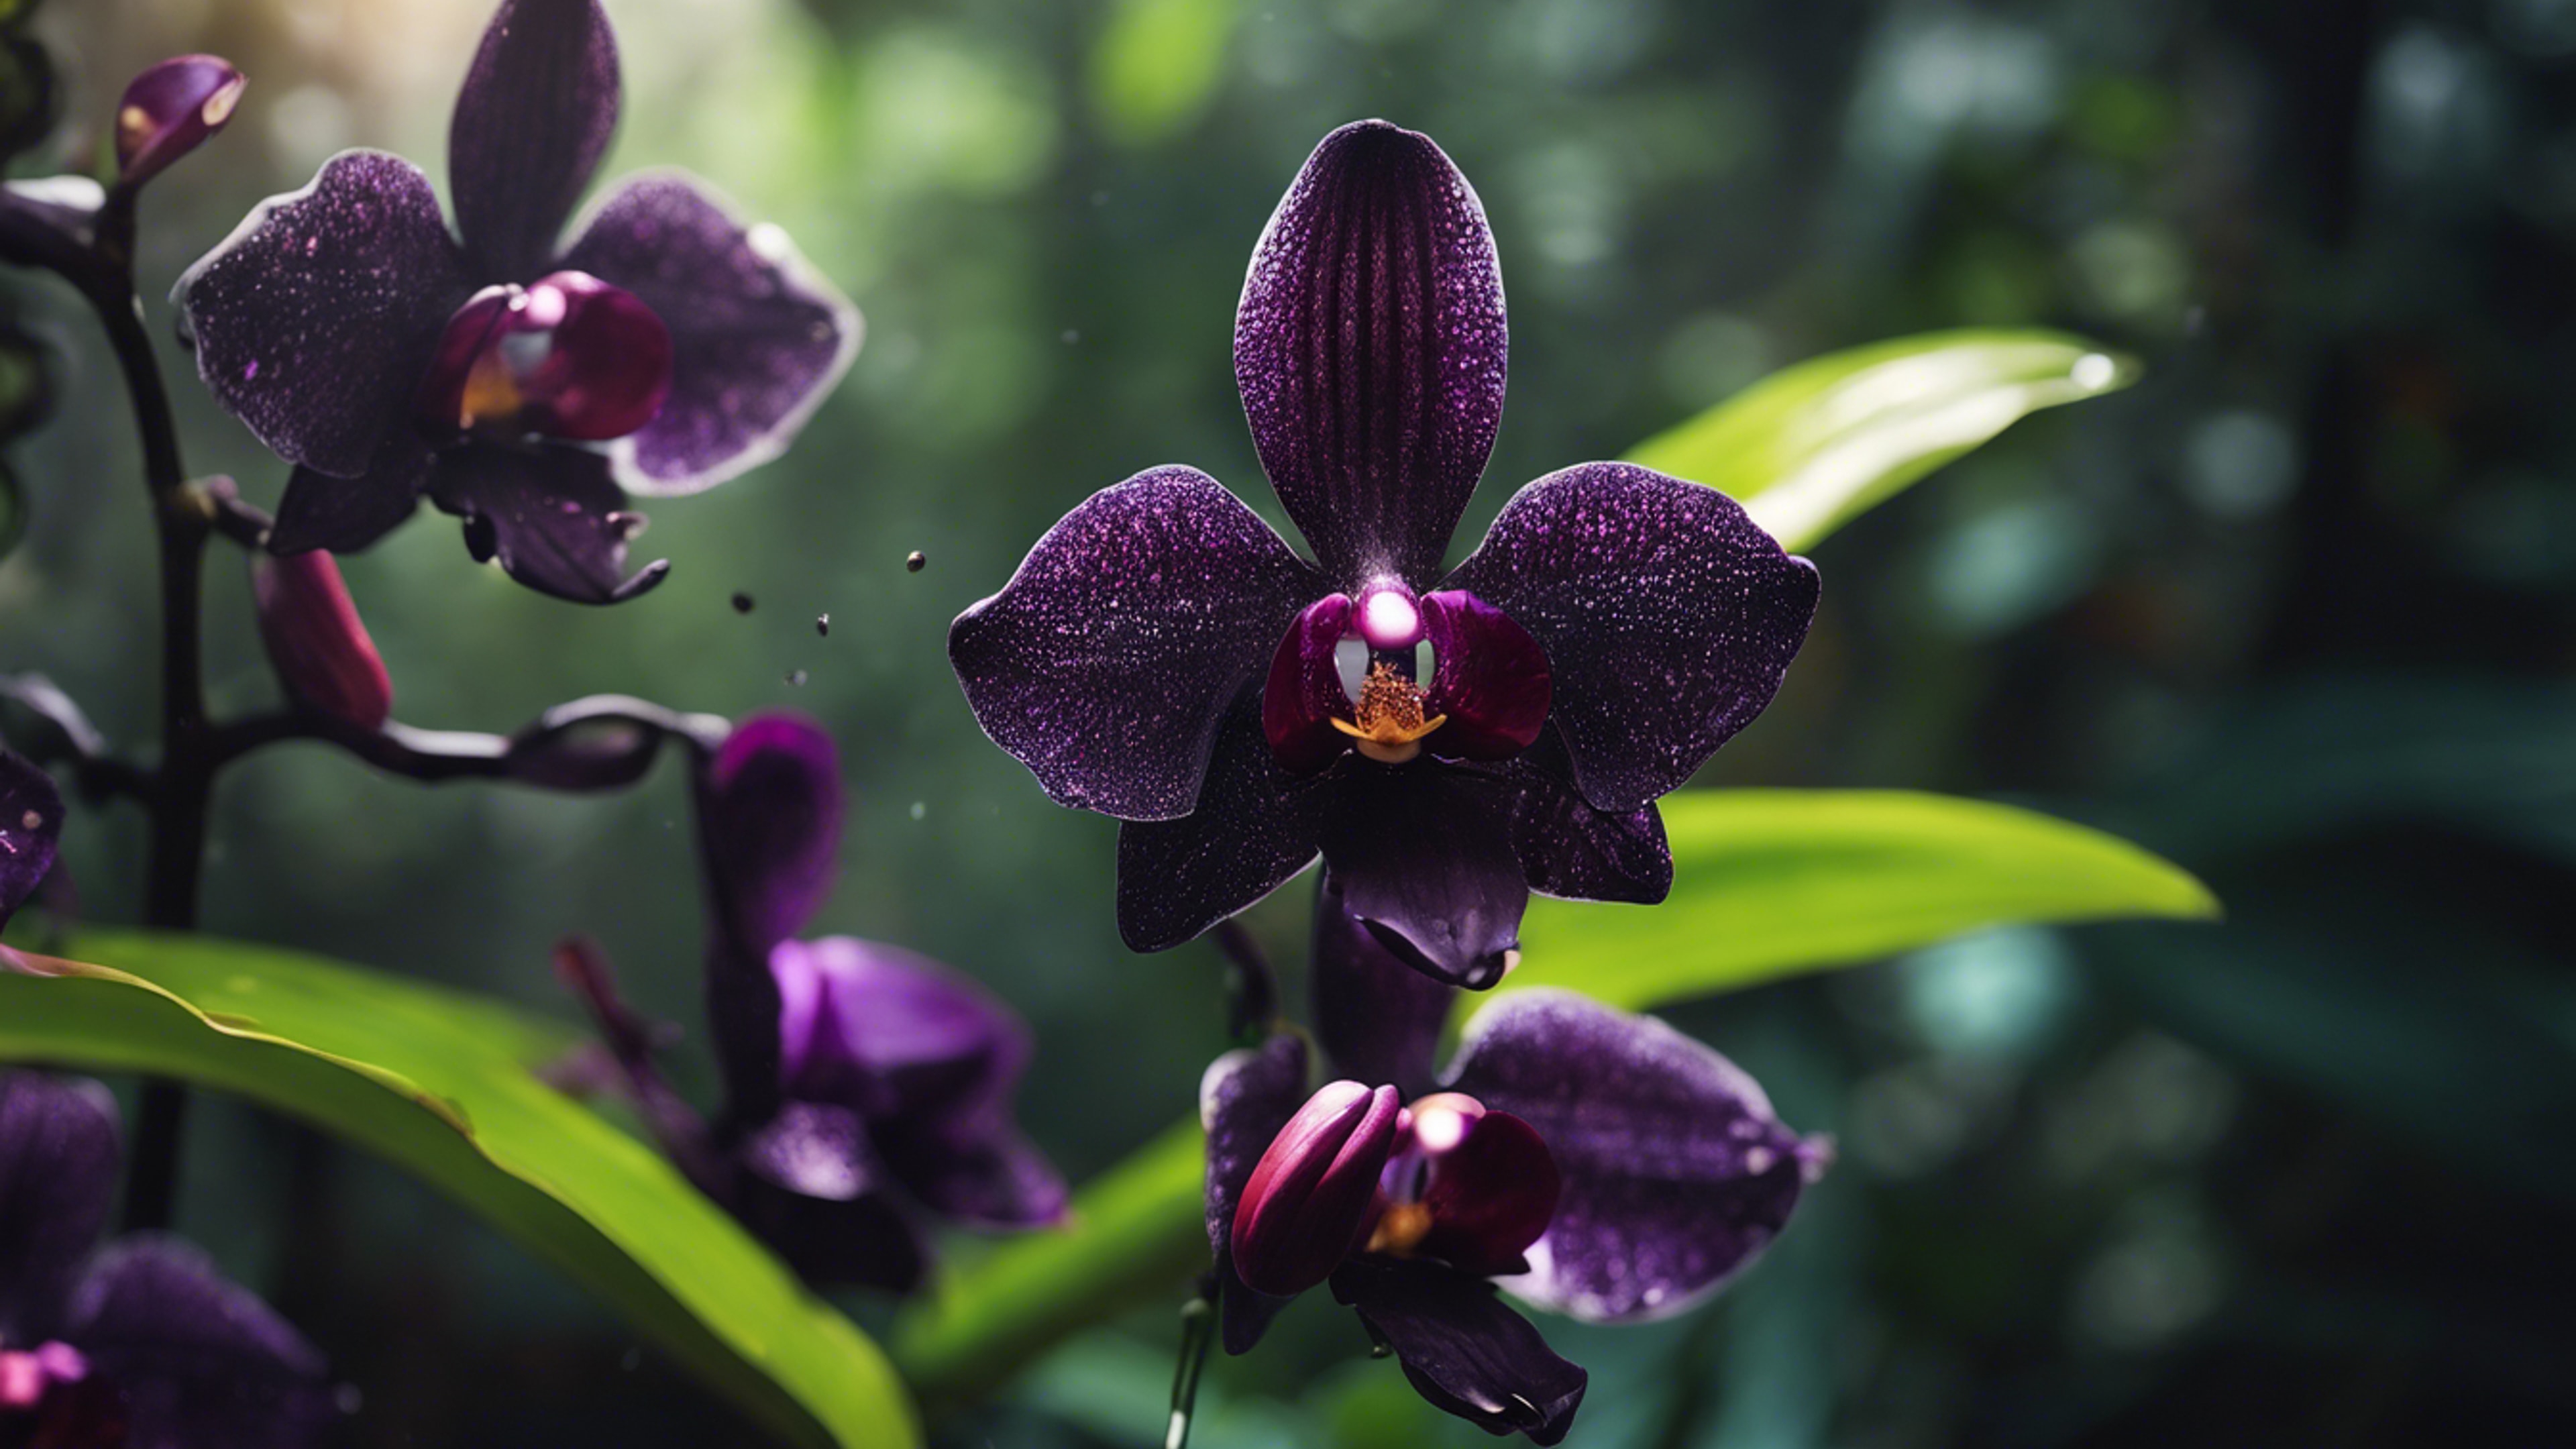 A black orchid with glossy petals and a velvet-like texture blossoming boldly within a lively rainforest. Tapetai[48dde896b7db479b91c6]